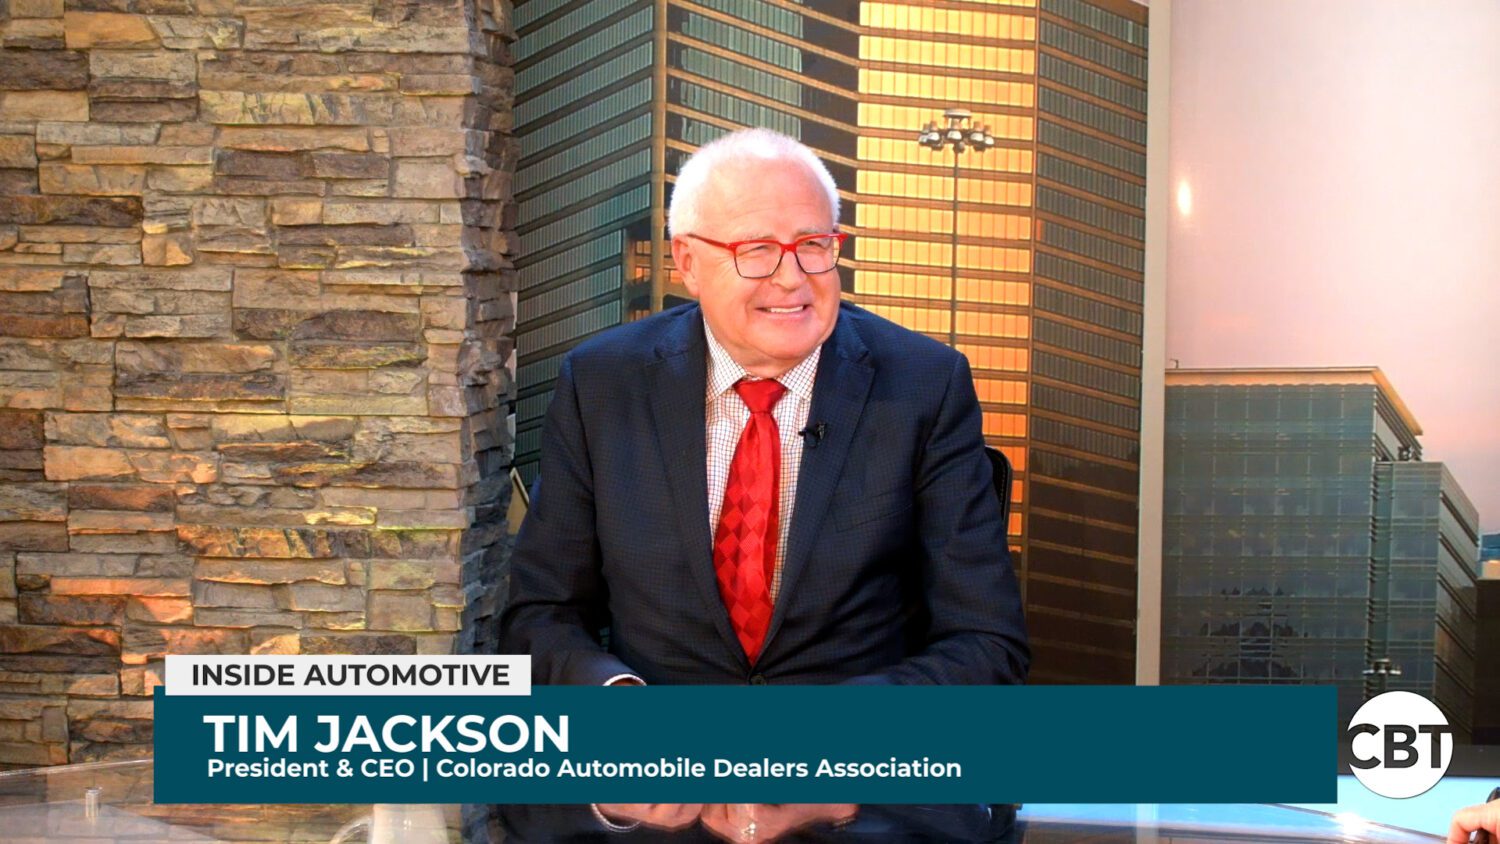 Tim Jackson joins Inside Automotive to discuss how the car business's transformation is testing OEM and dealer relations like never before